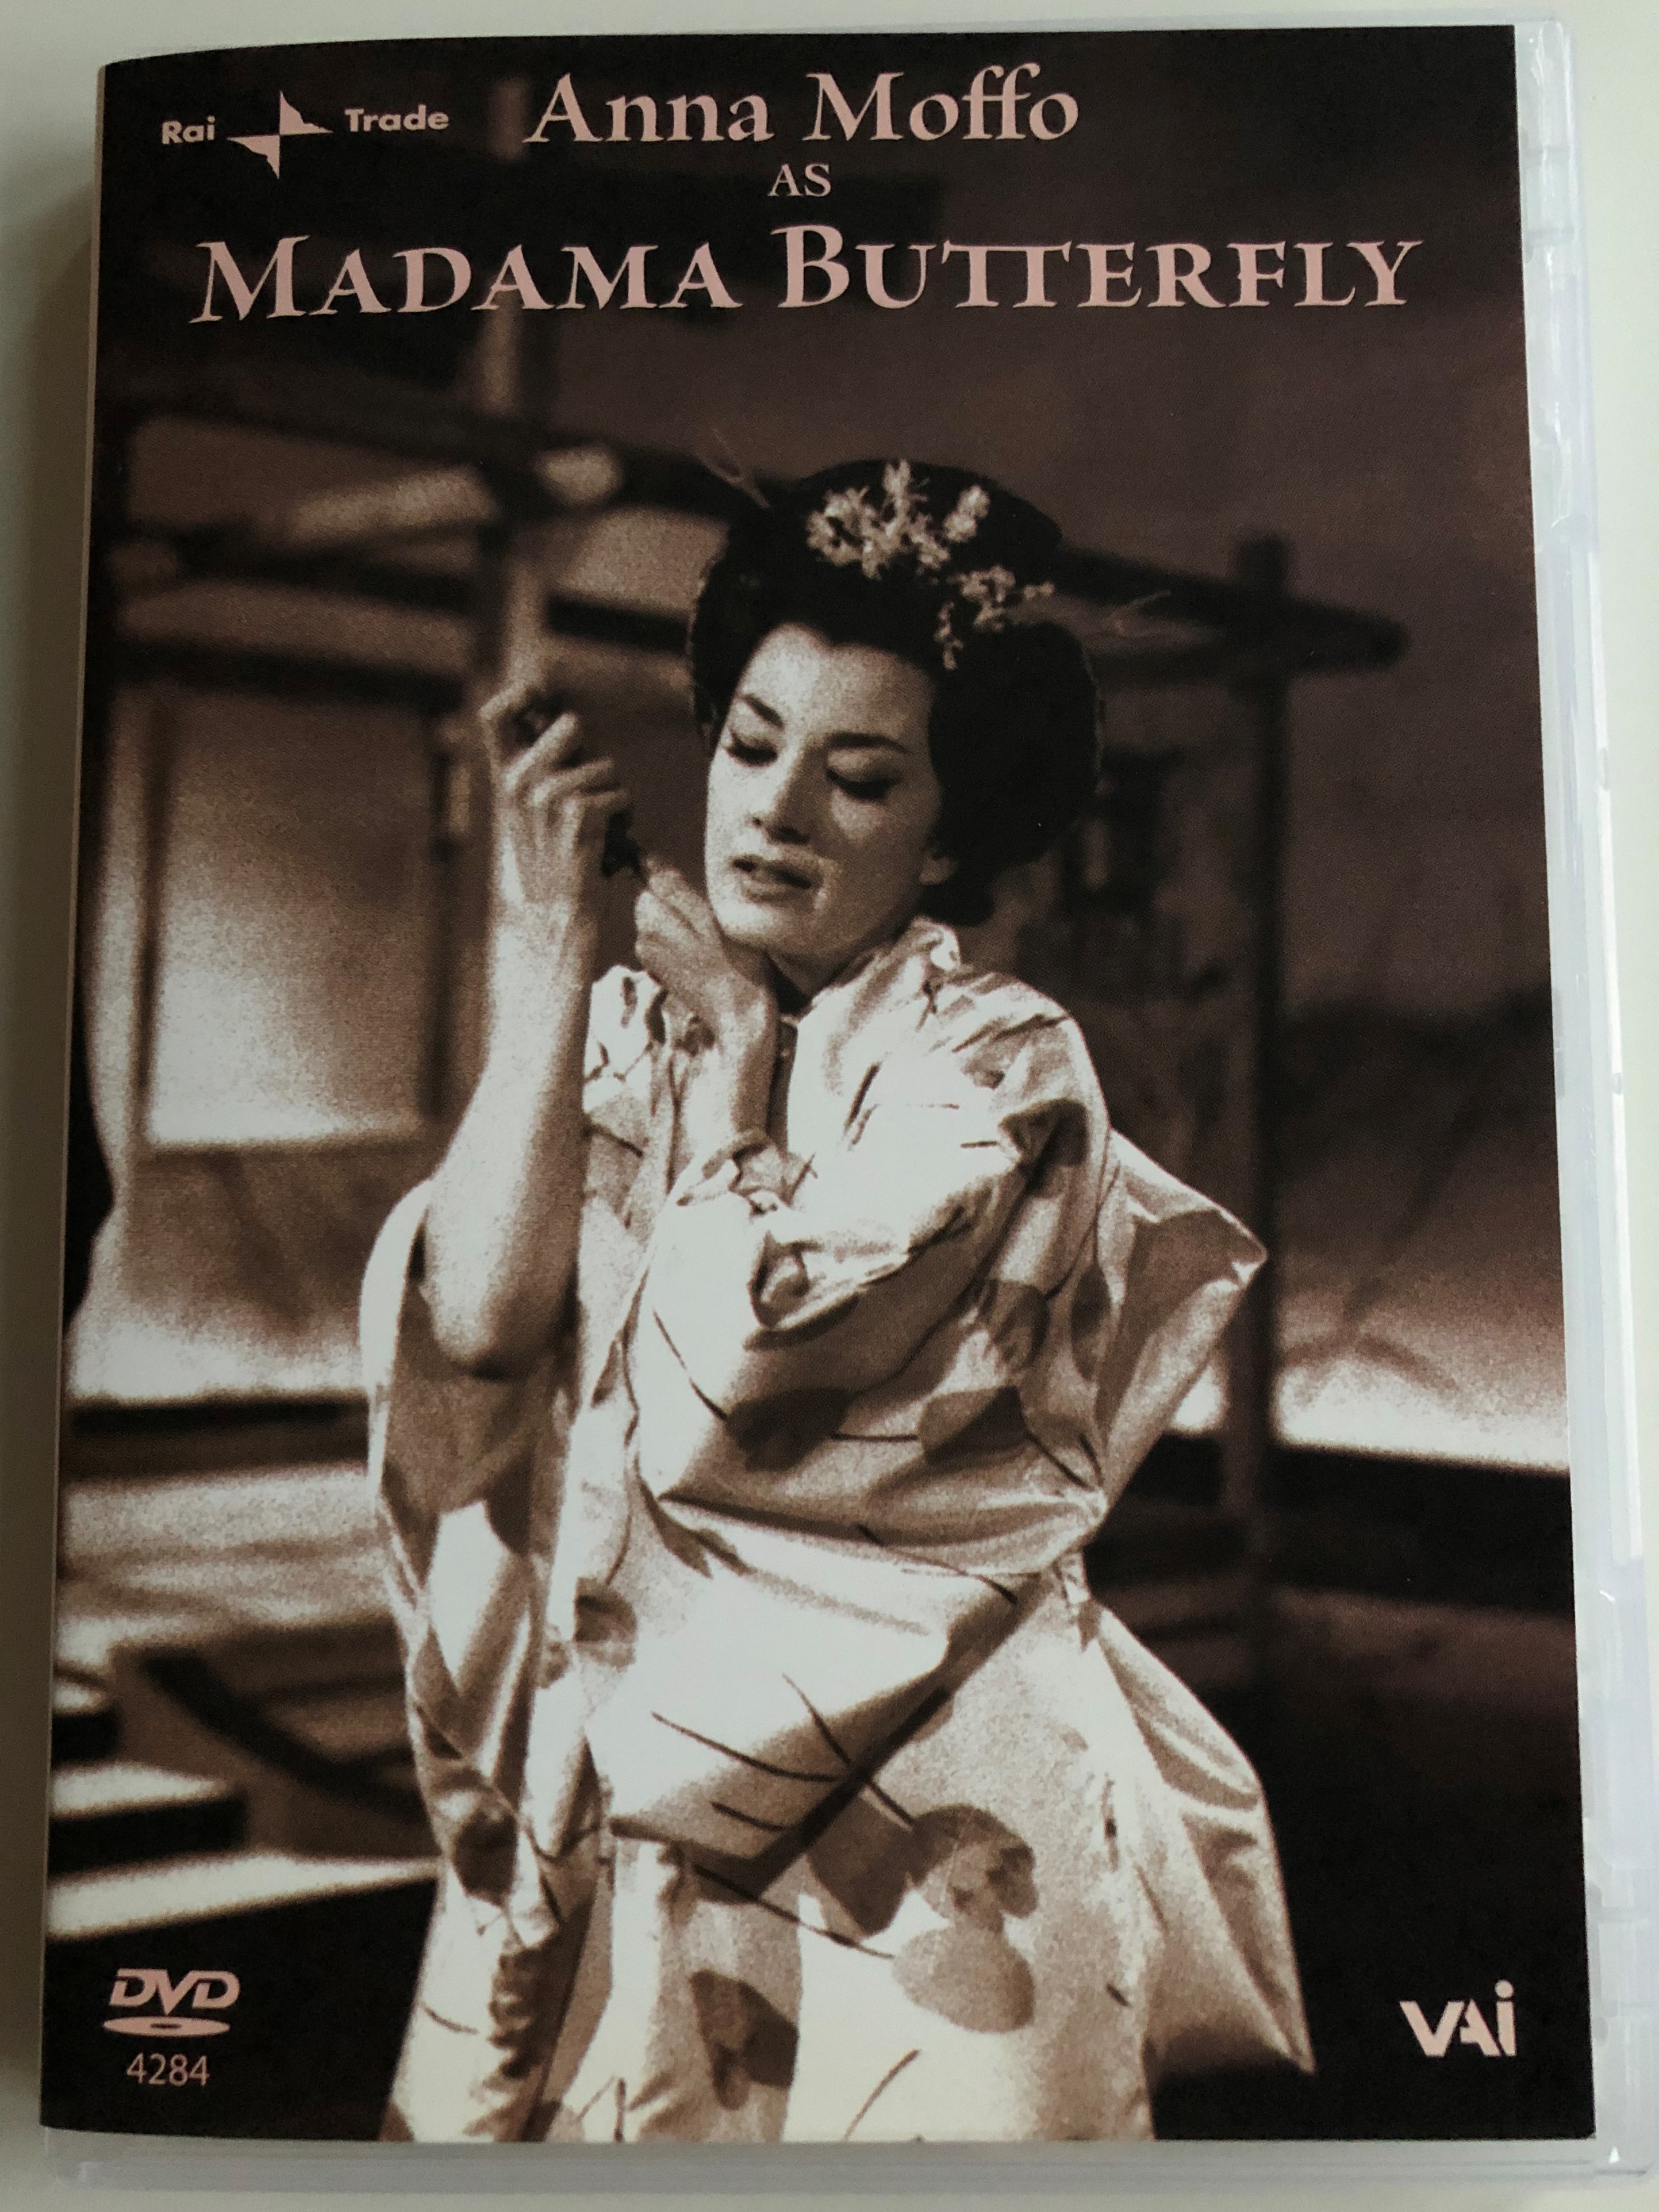 Anna Moffo as Madama Butterfly DVD 1956 Opera in Three Acts / Directed by  Mario Lanfranchi / Music by Giacomo Puccini / Orchestra and Chorus  Radiotelevisione Italiana Milano / Conducted by Oliviero De Fabritiis -  bibleinmylanguage